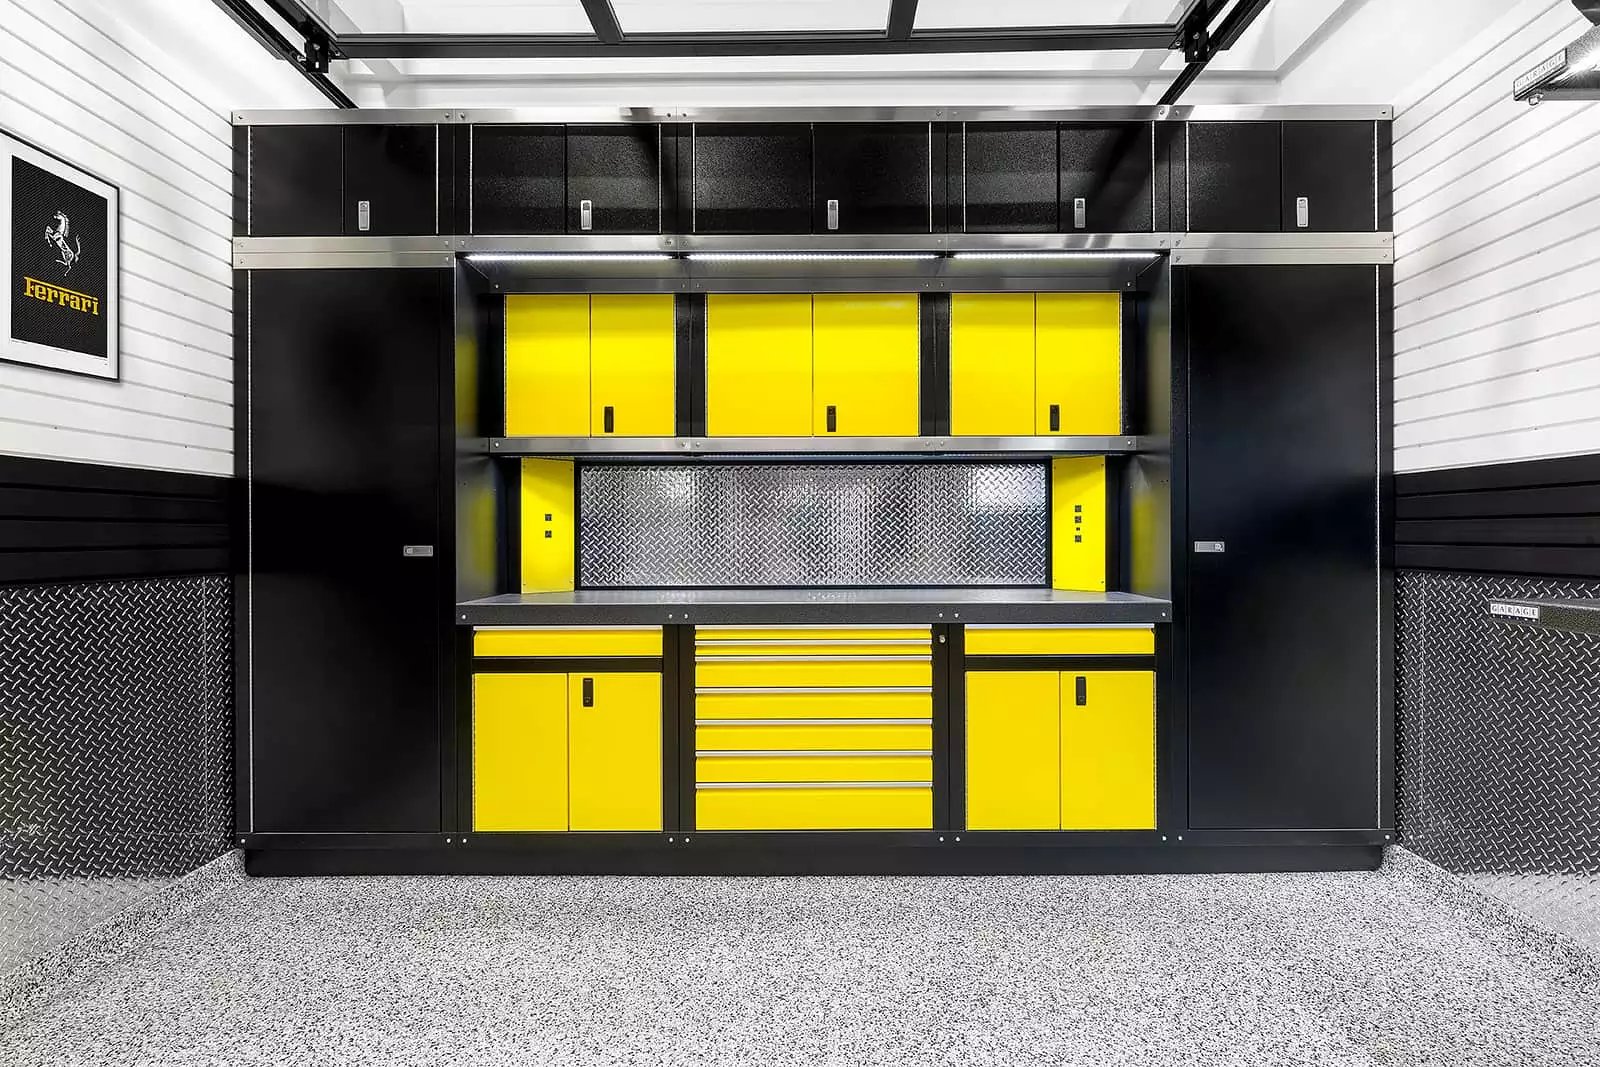 xgl_rally-garage_cabinetry_black_yellow_front.jpg.pagespeed.ic.2DtYLlpbbK